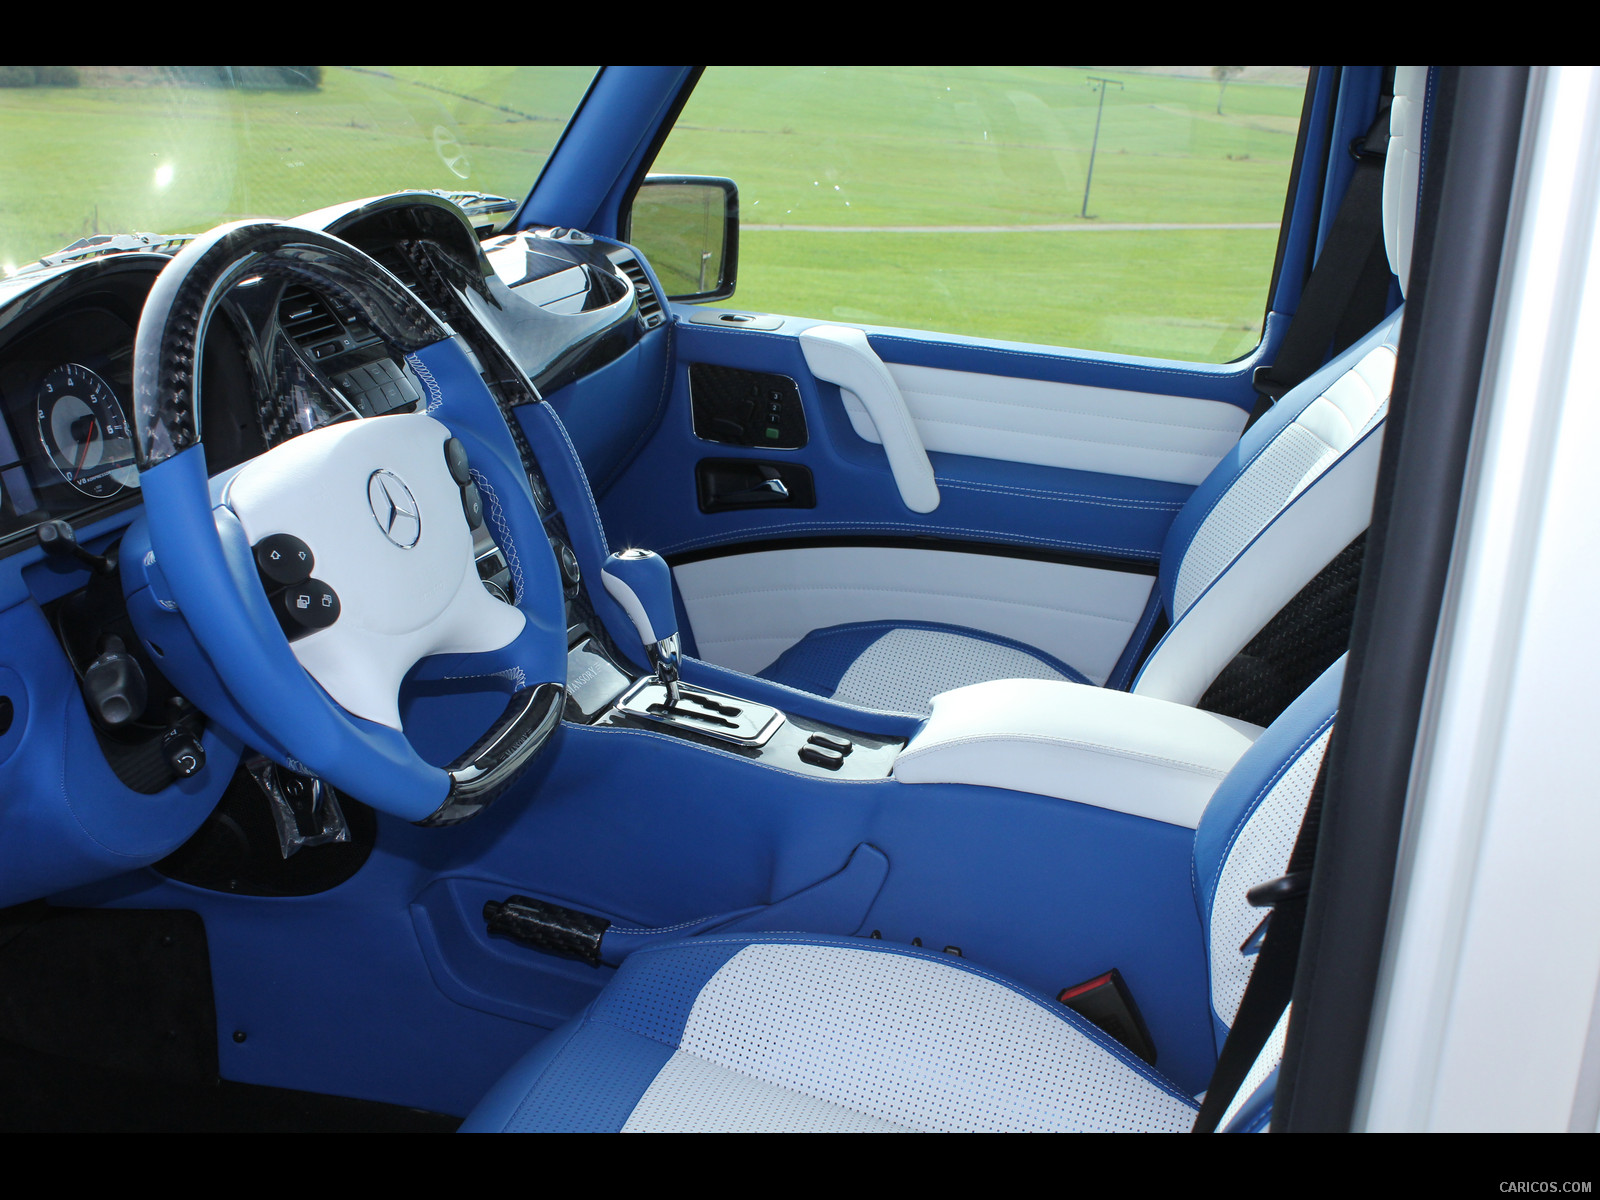 Mansory G-Couture based on Mercedes G-Class  - Interior, #31 of 39